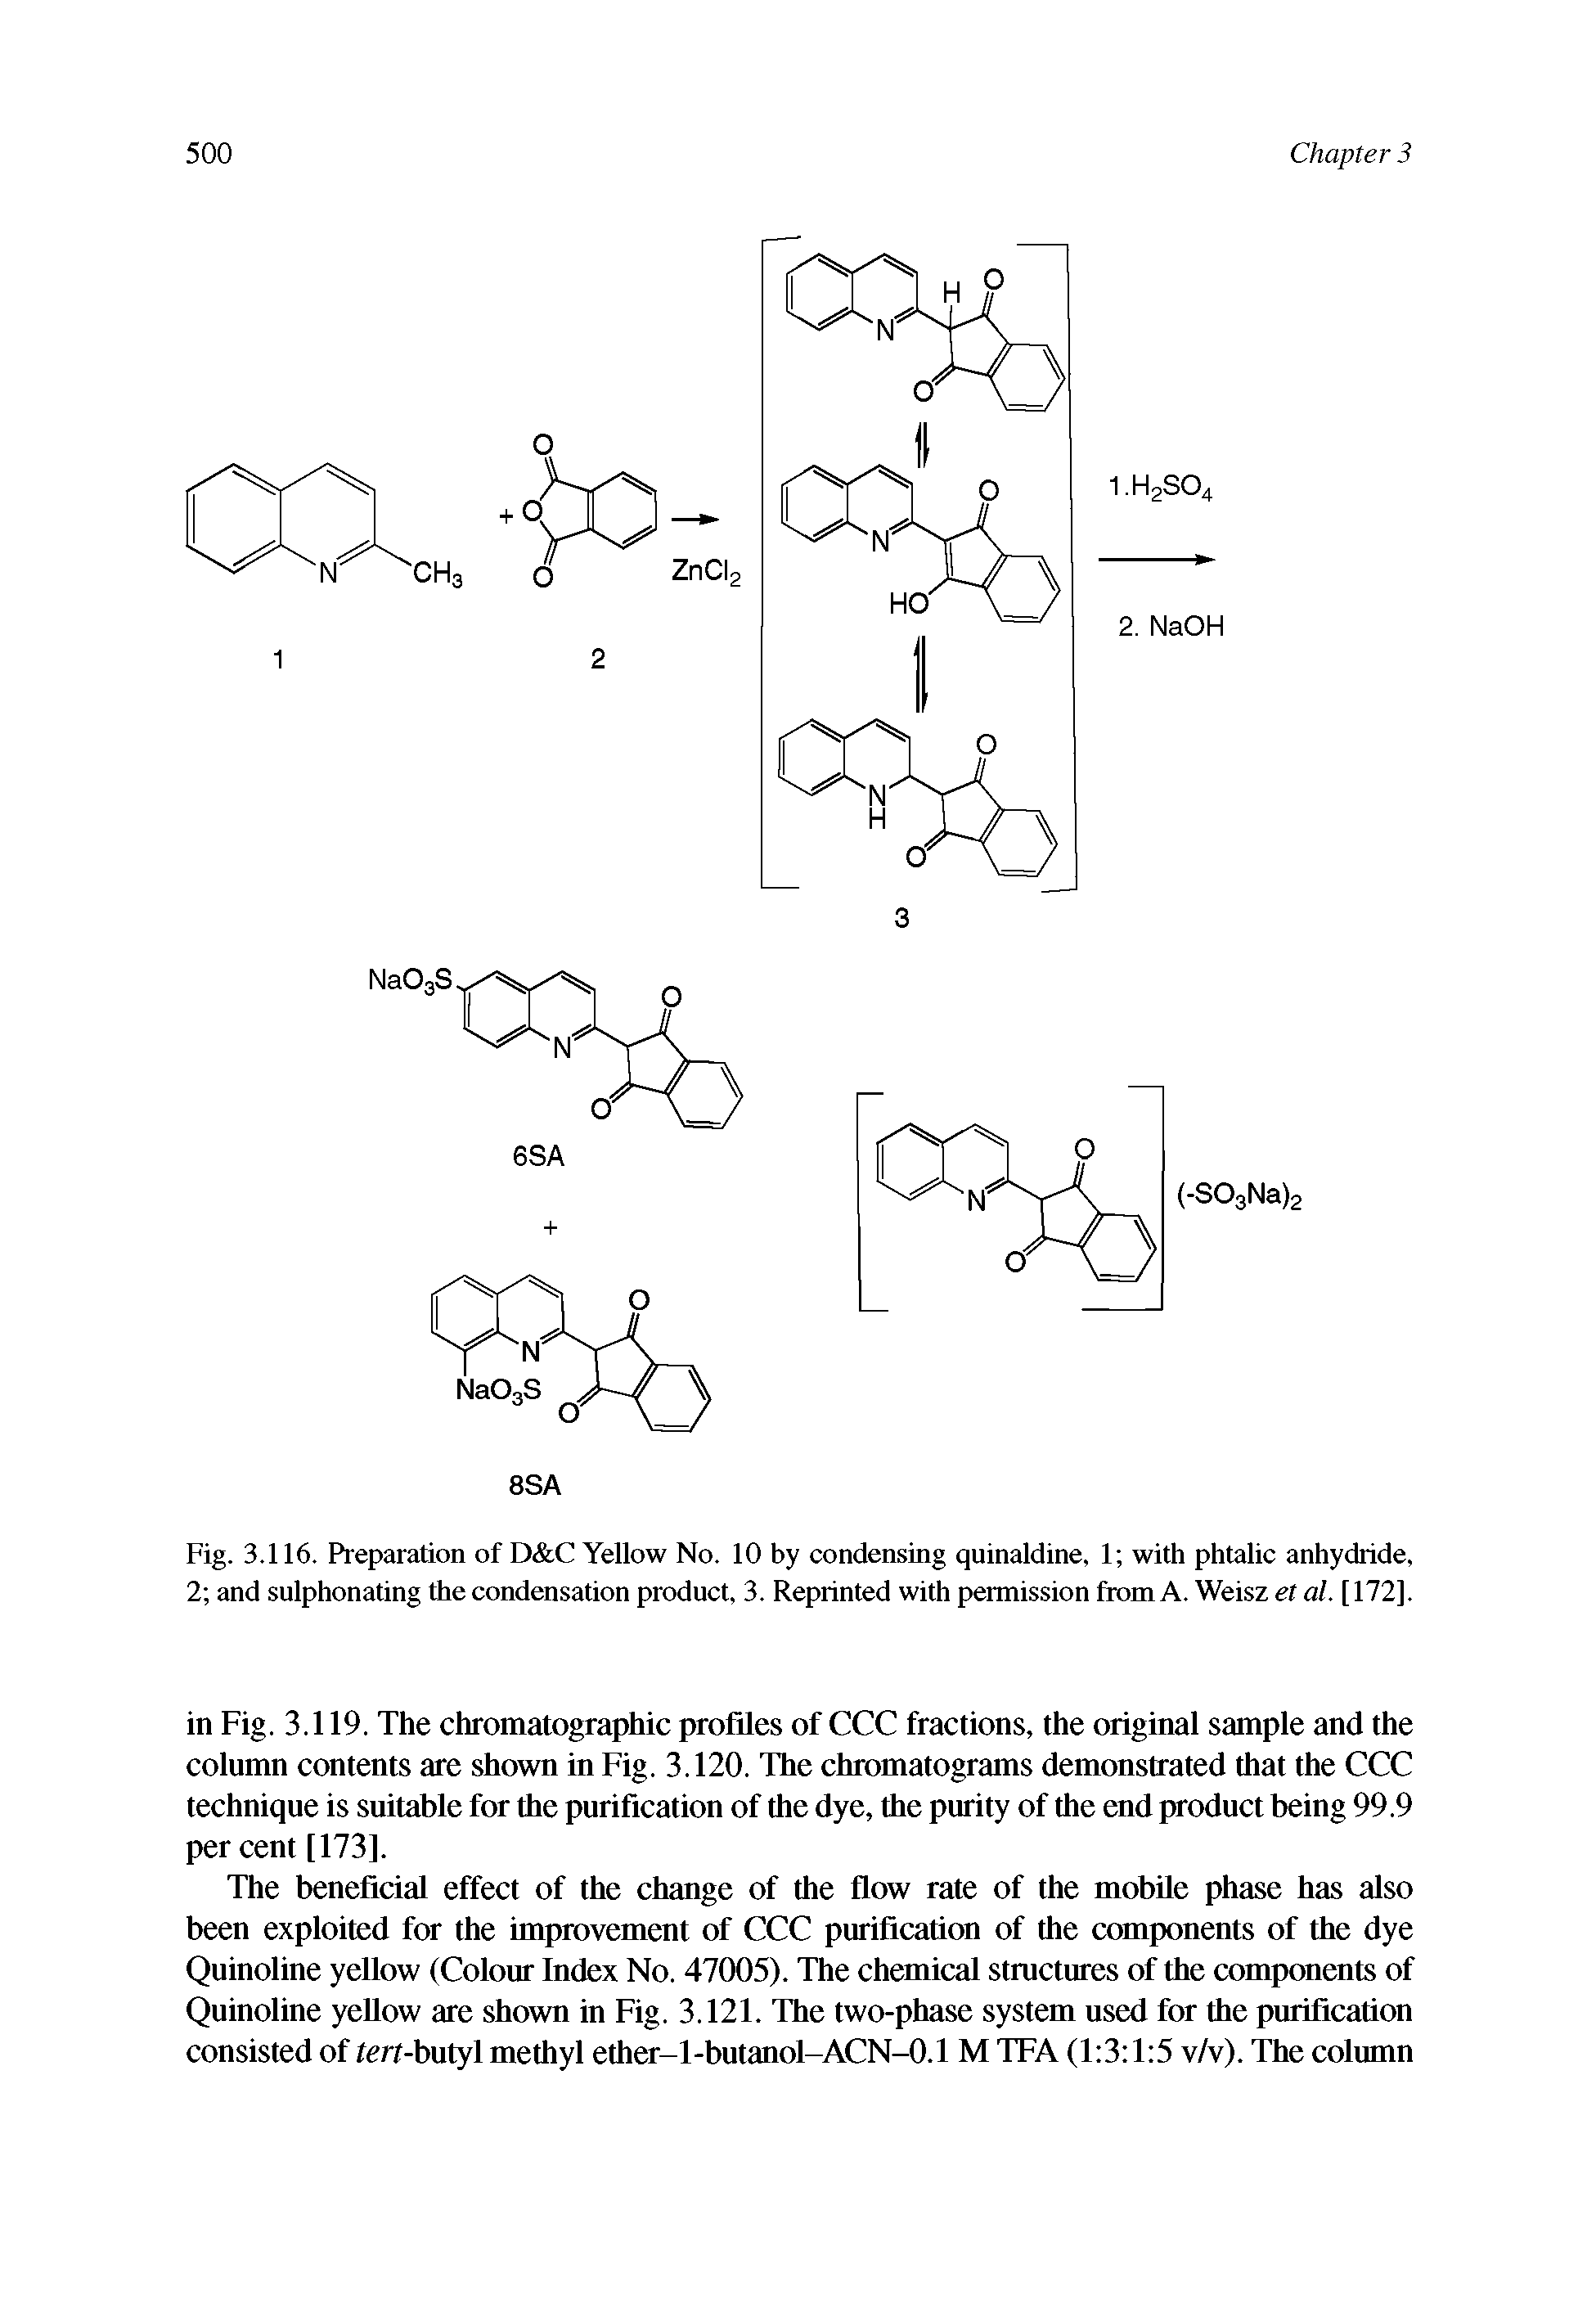 Fig. 3.116. Preparation of D C Yellow No. 10 by condensing quinaldine, 1 with phtalic anhydride, 2 and sulphonating the condensation product, 3. Reprinted with permission from A. Weiszet al. [172].